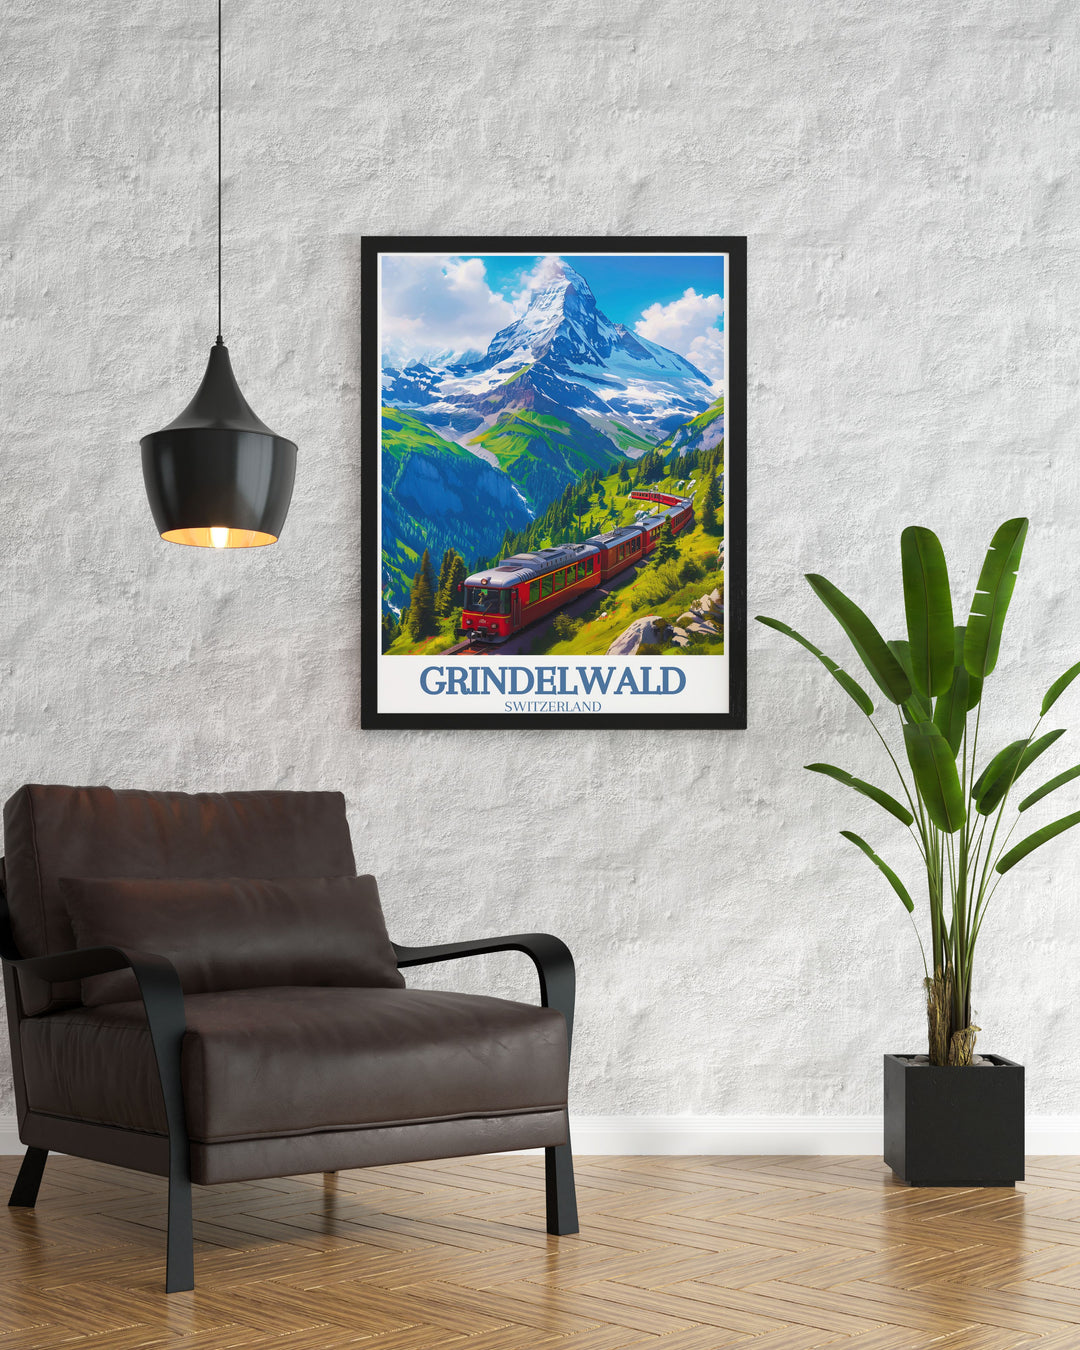 A captivating travel poster of Eiger mountain Grindelwald First featuring breathtaking views of the Swiss Alps. This Grindelwald First poster is perfect for enhancing your home decor with its stunning depiction of the mountain village.